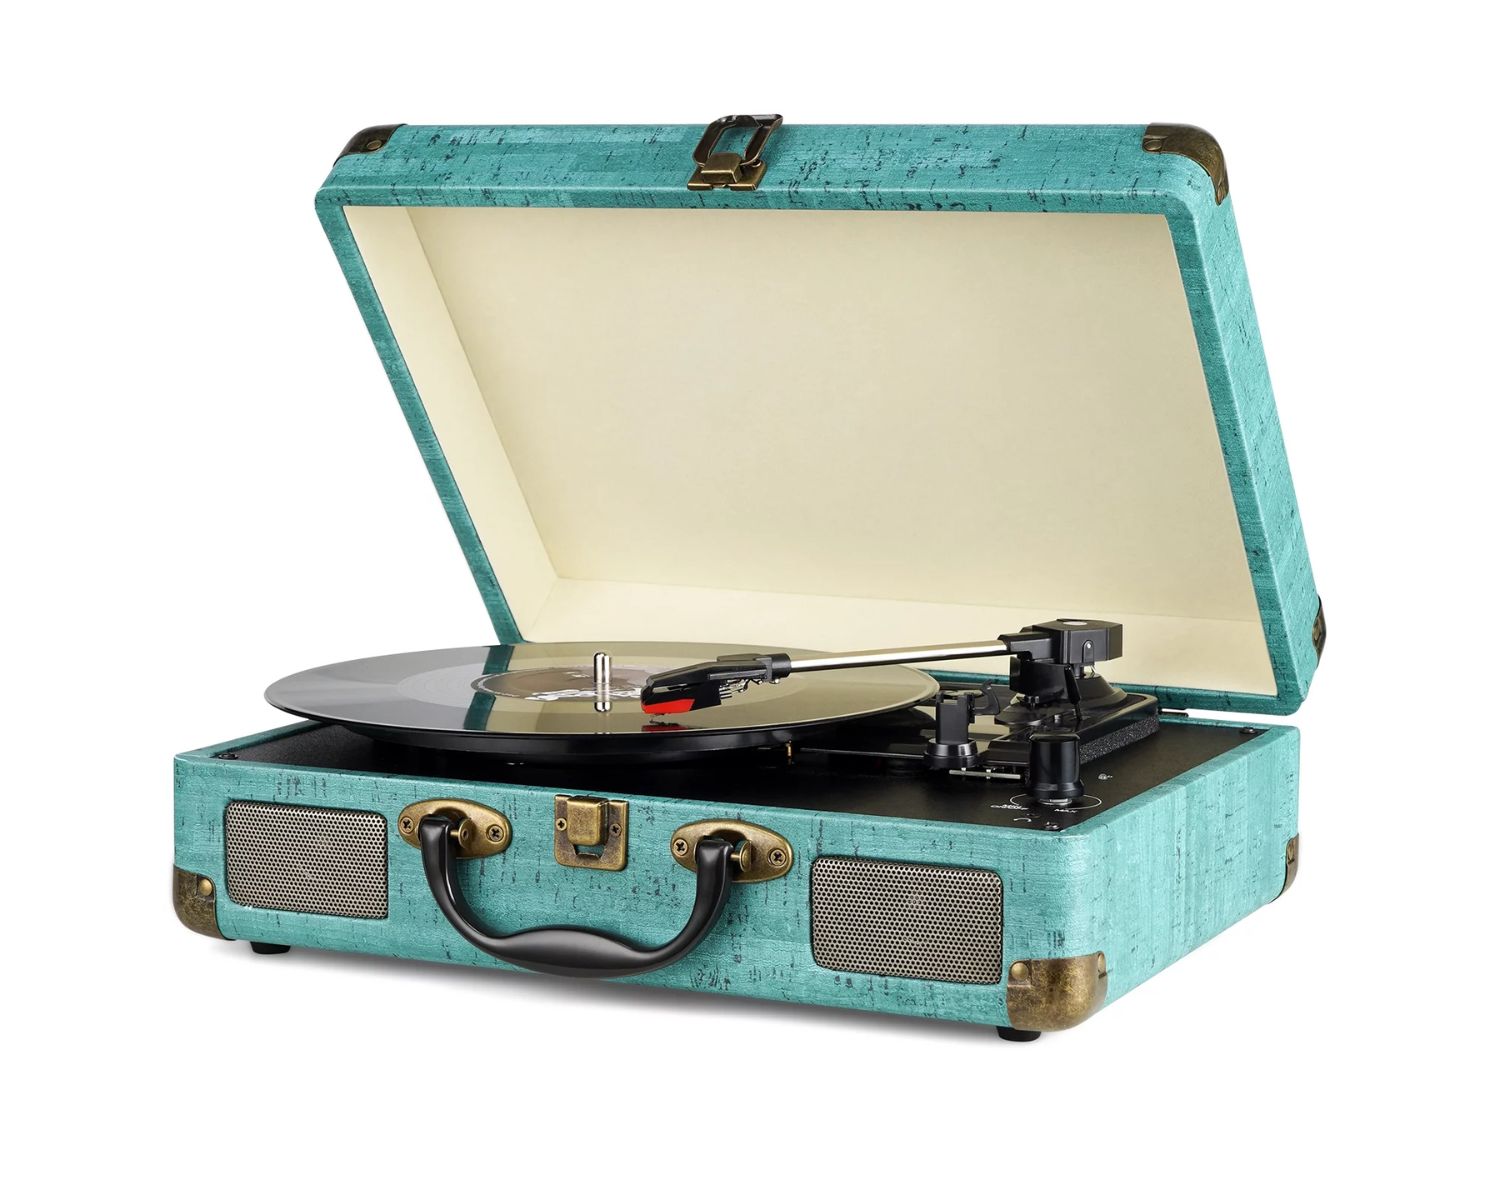 Vintage Record Player Review: Uncovering the Best Options